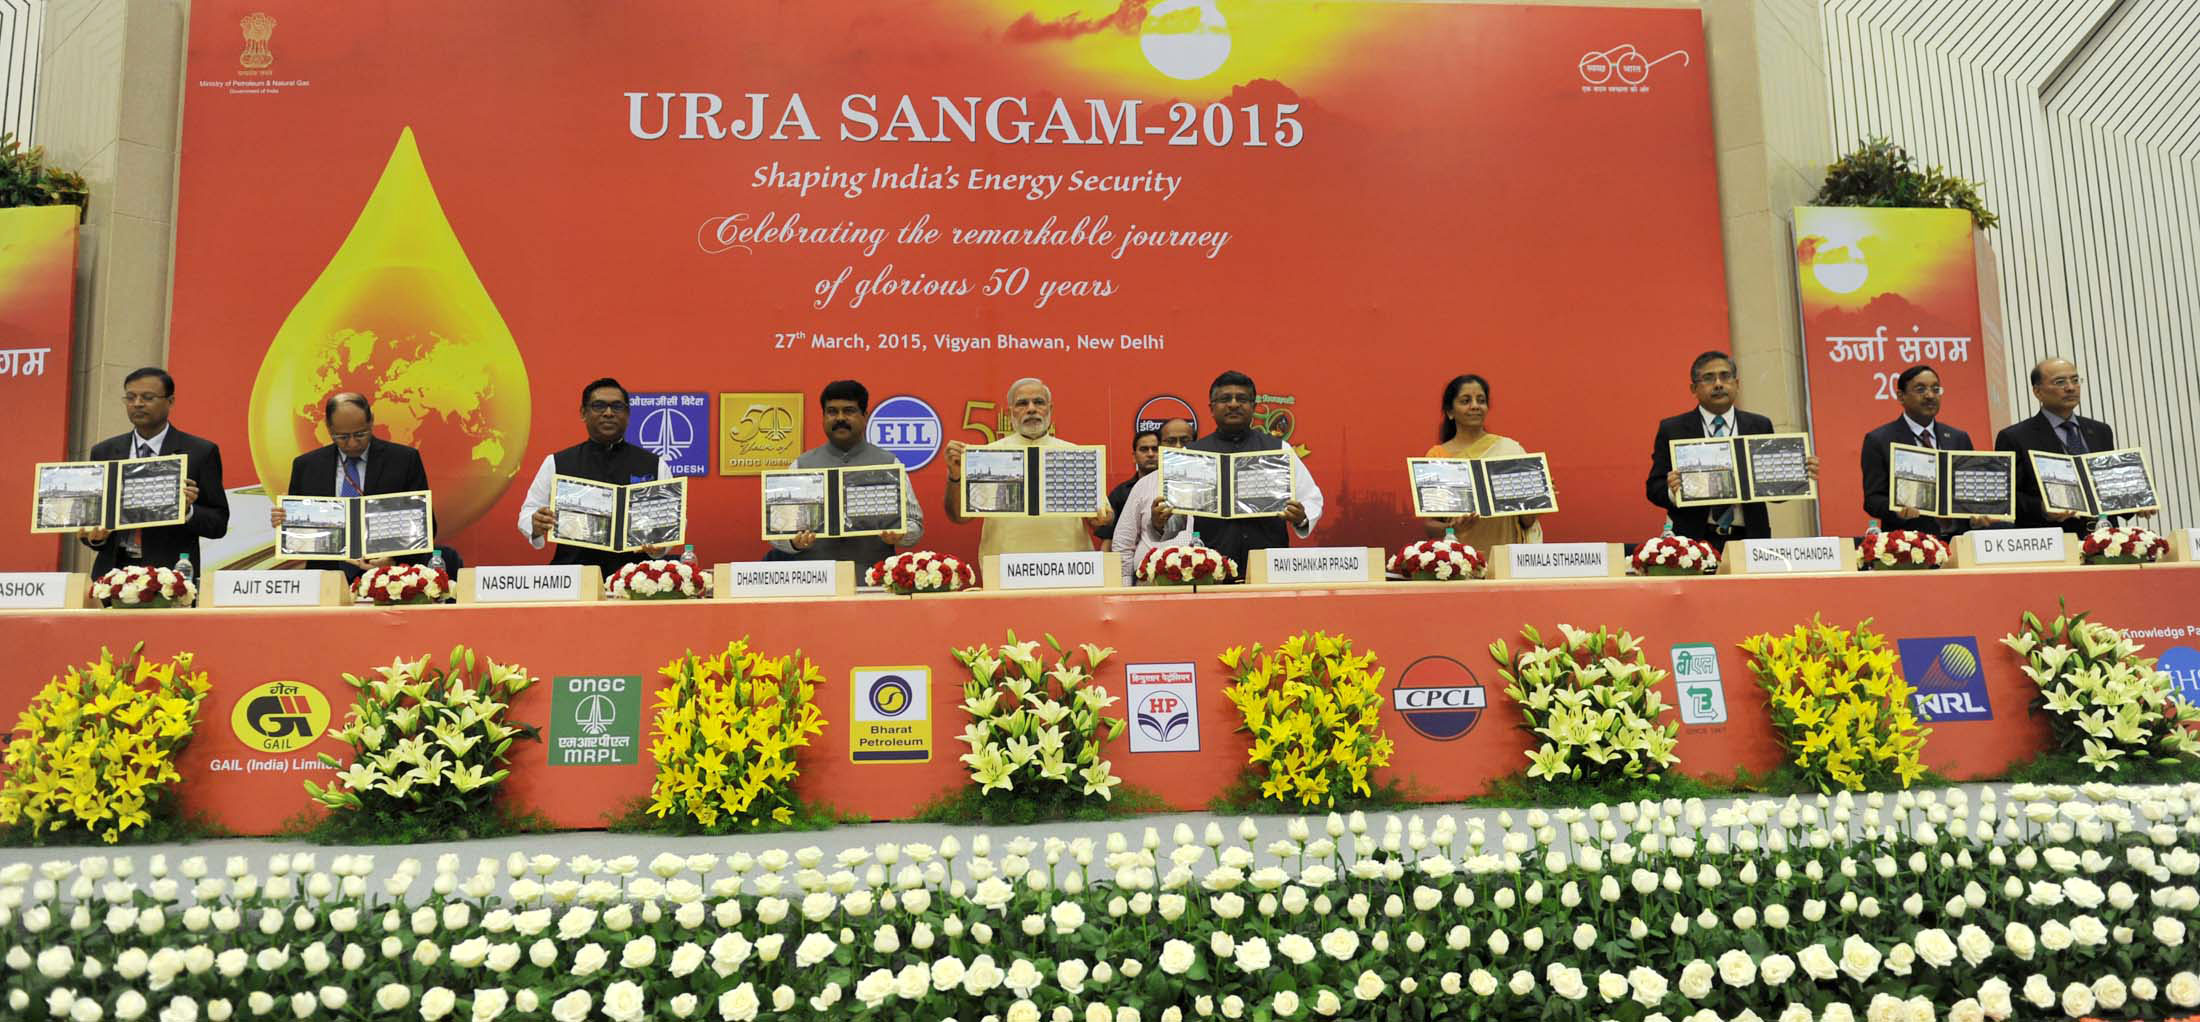 PM launches “Give it up” campaign for voluntarily giving up LPG subsidy